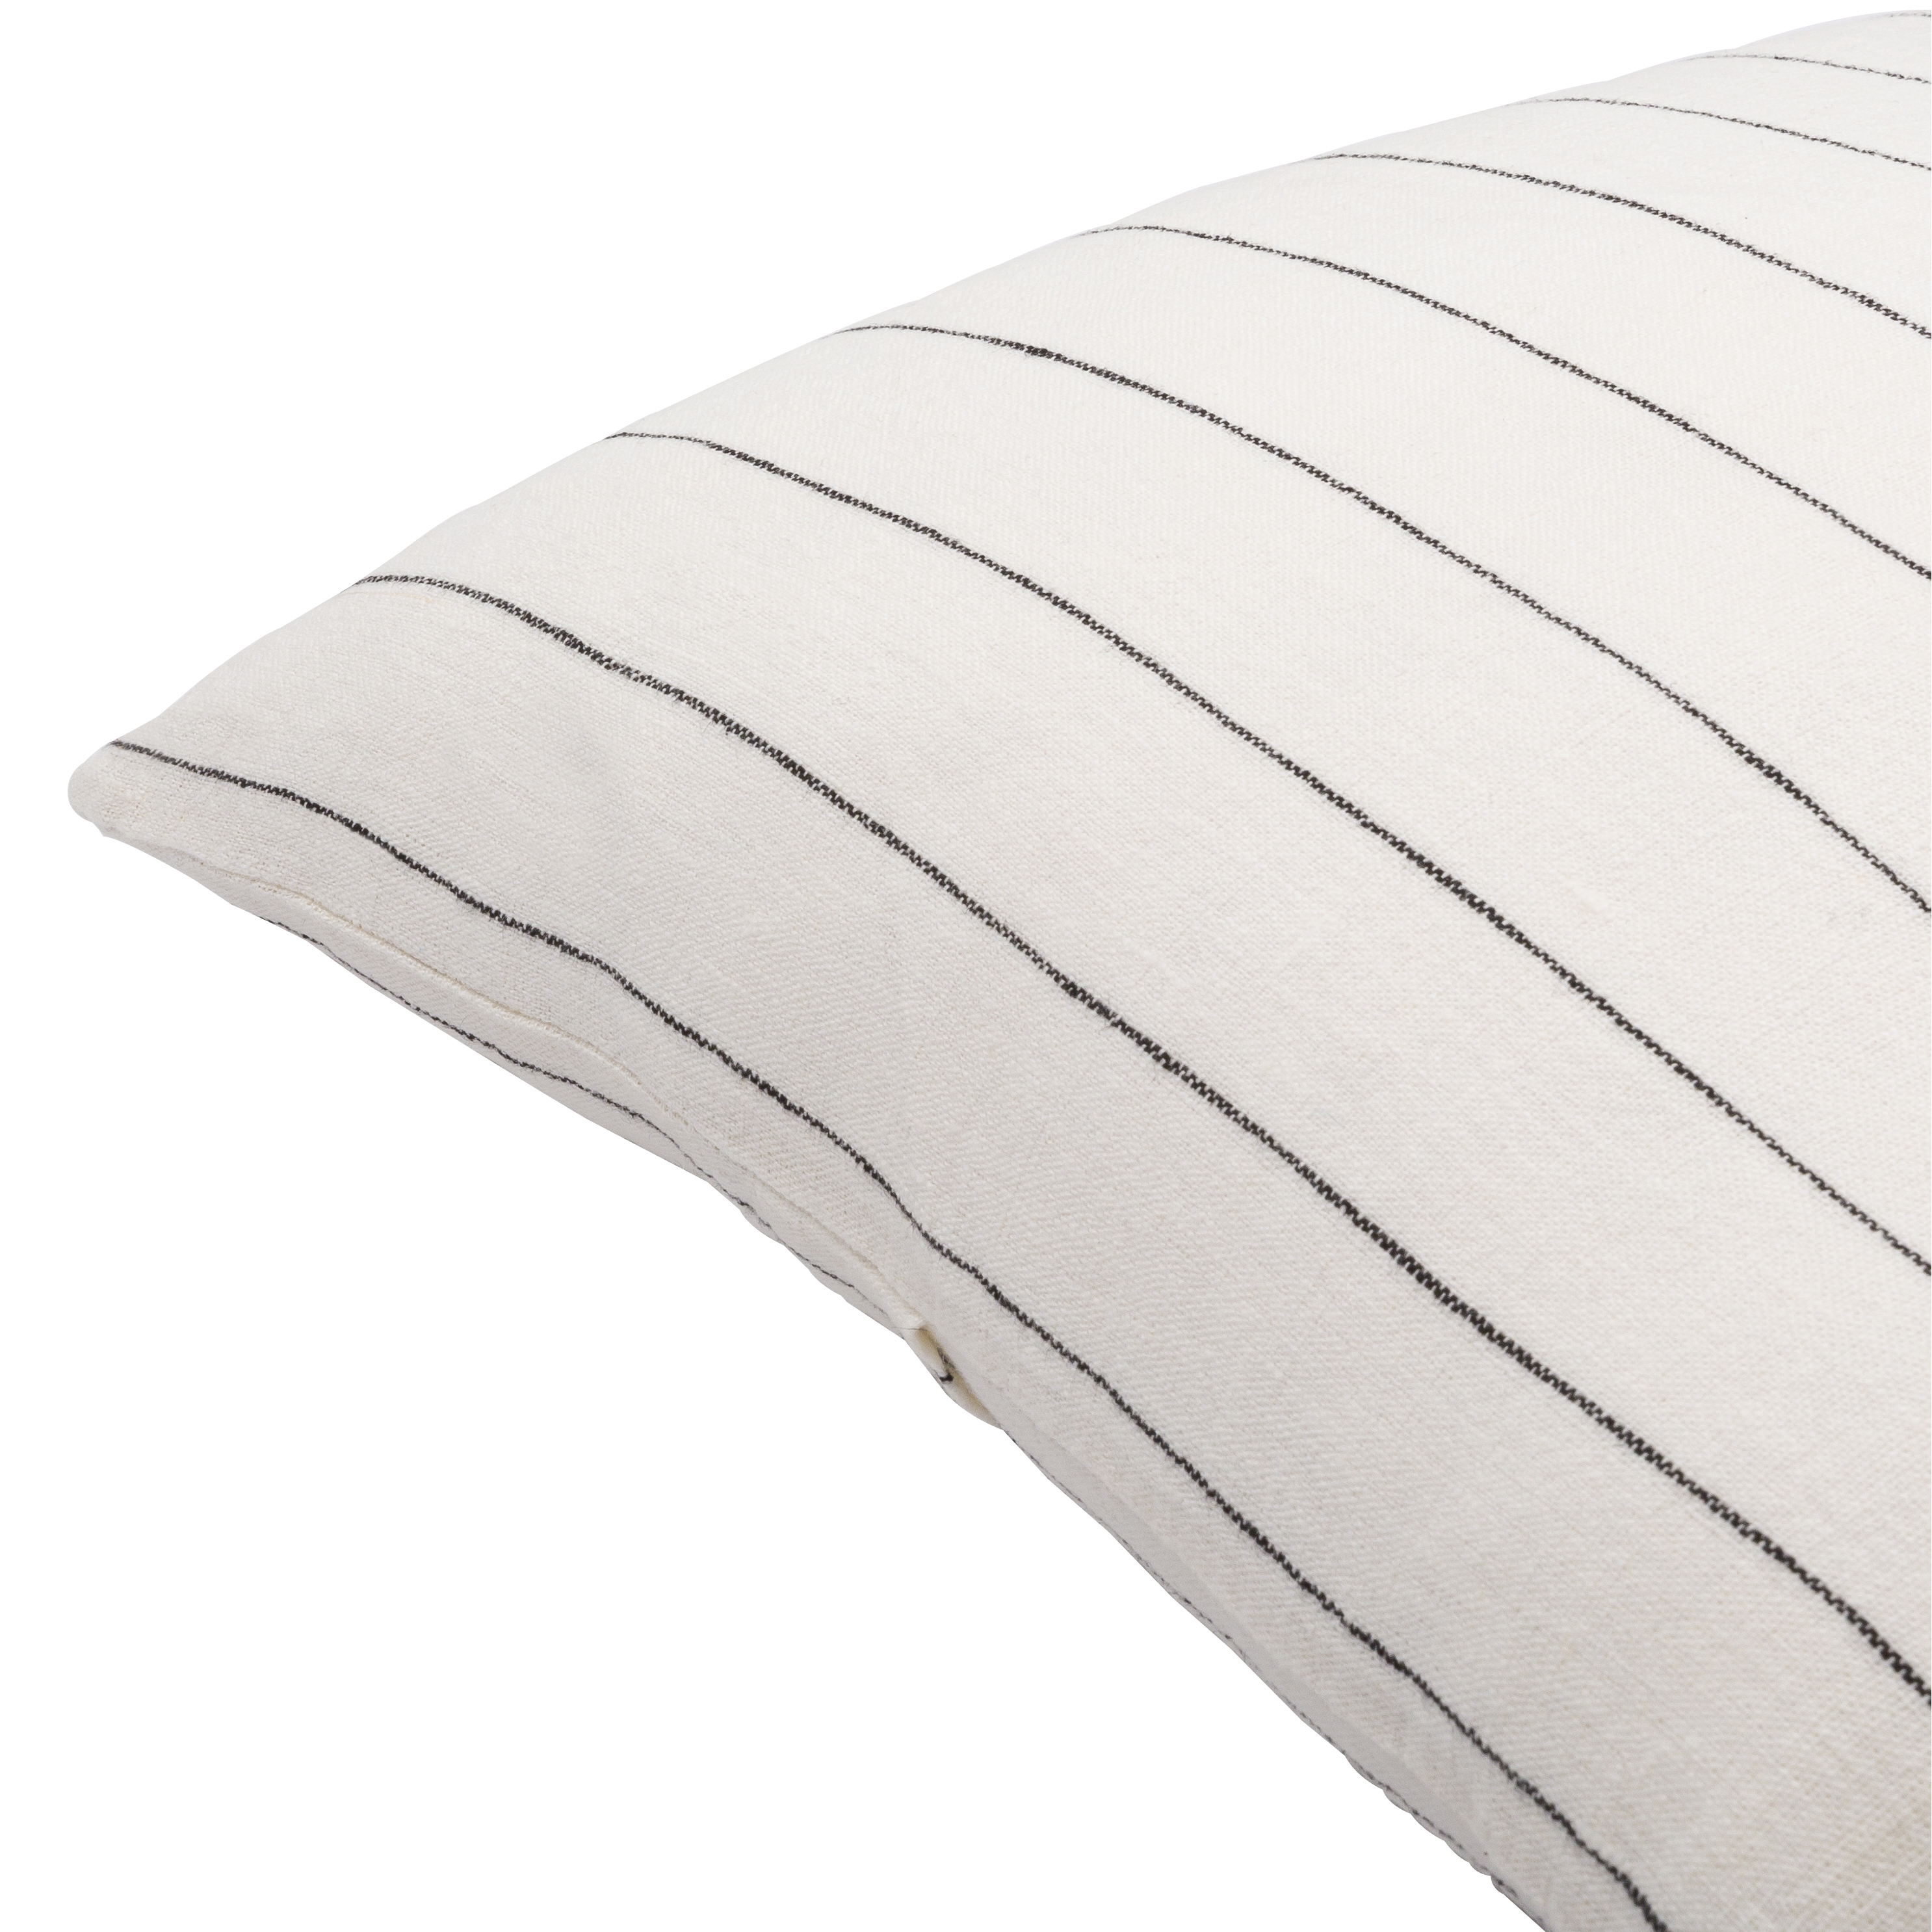 Linen Stripe Buttoned Throw Pillow, 18" x 18", with down insert - Image 2